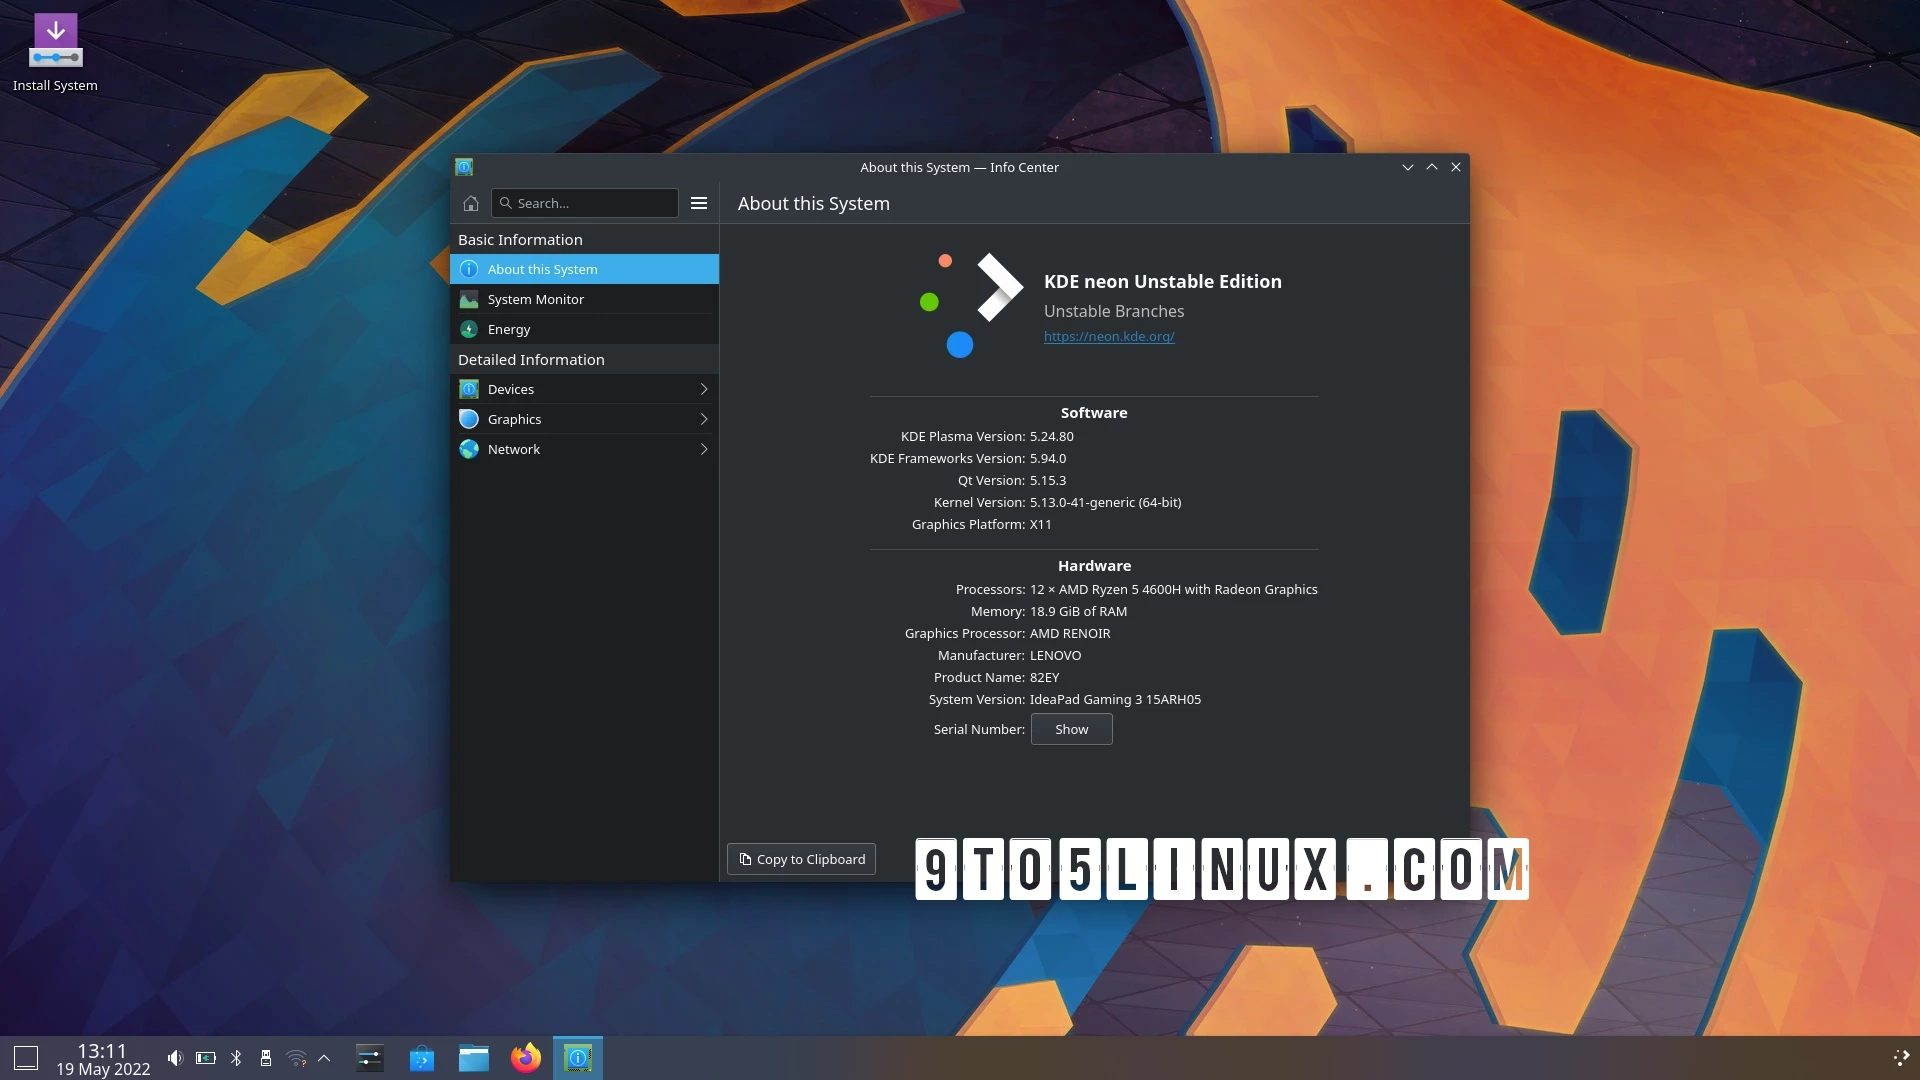 KDE Plasma 5.25 Beta Is Here with Floating Panels, New Customization Options, and More